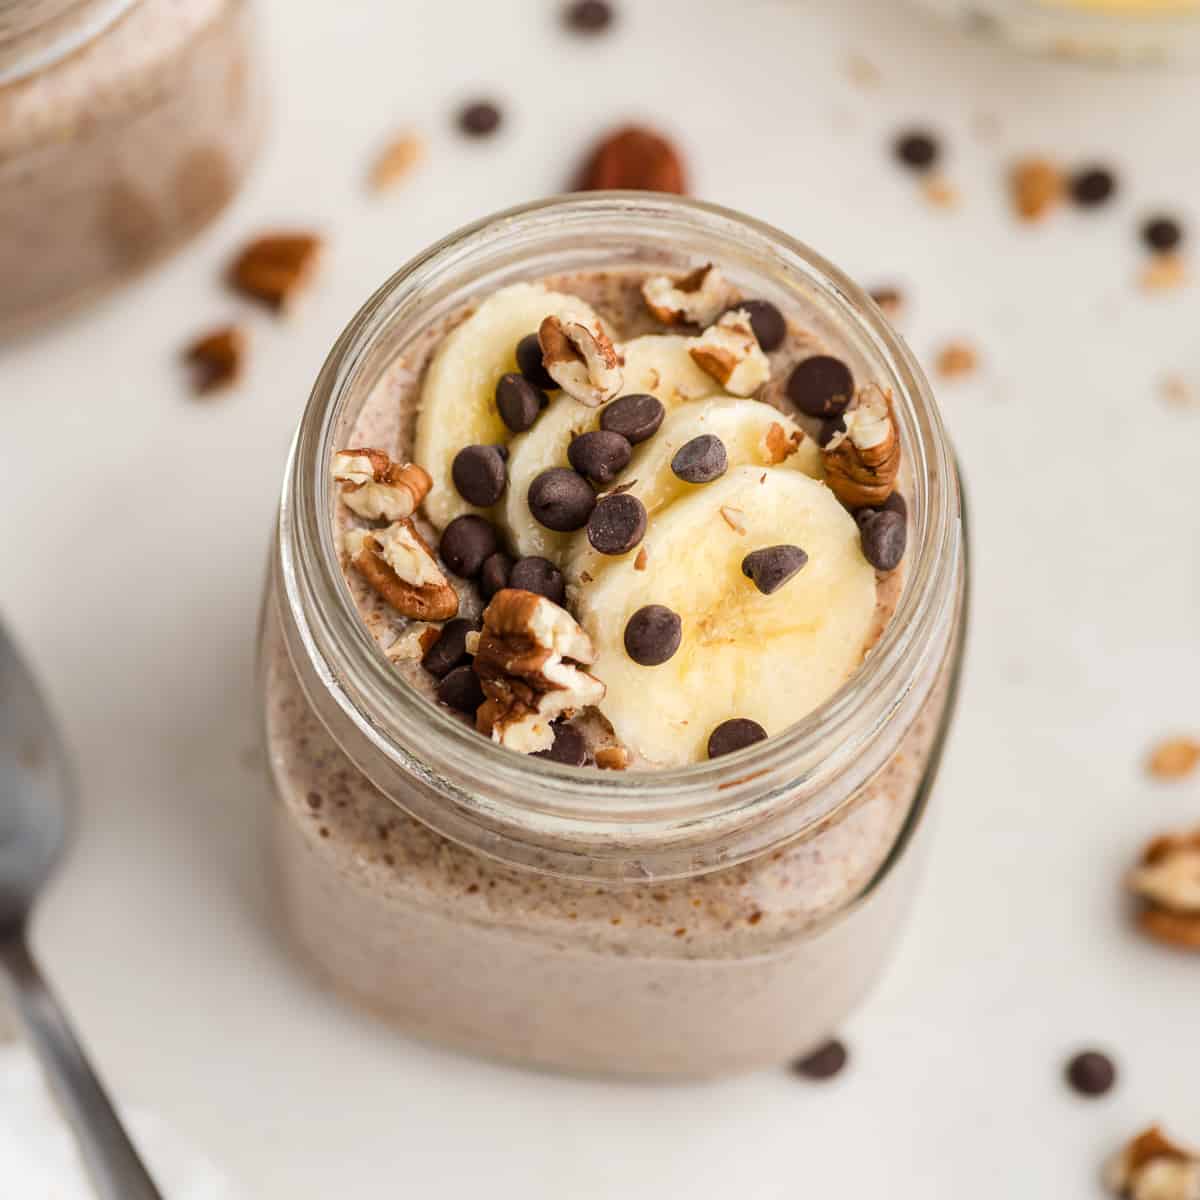 Flax Pudding (5 Minutes, Dairy Free) - Bites of Wellness